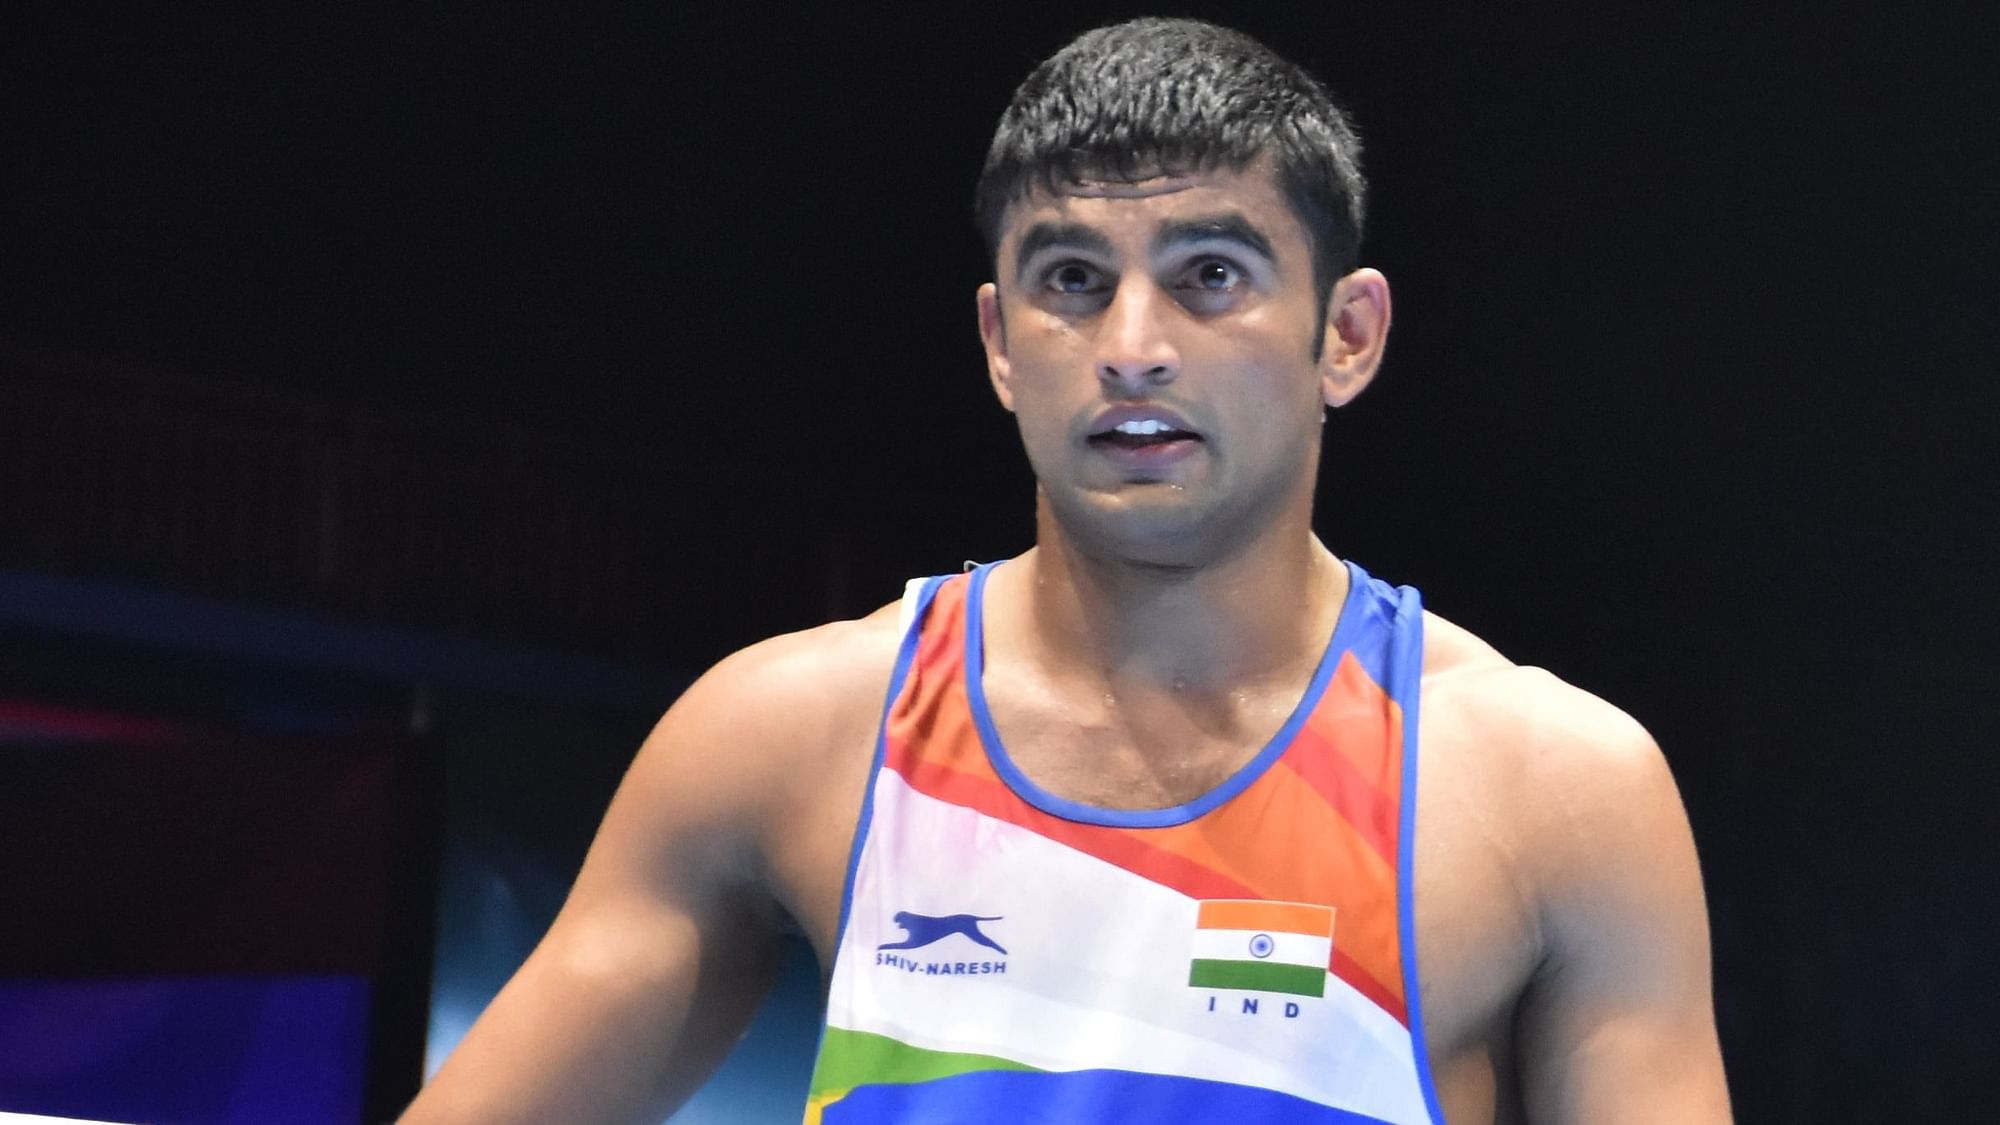 Manish thoroughly dominated his quarter-final bout against Pakistan’s Suleman Baloch to register a commanding 5-0 victory.